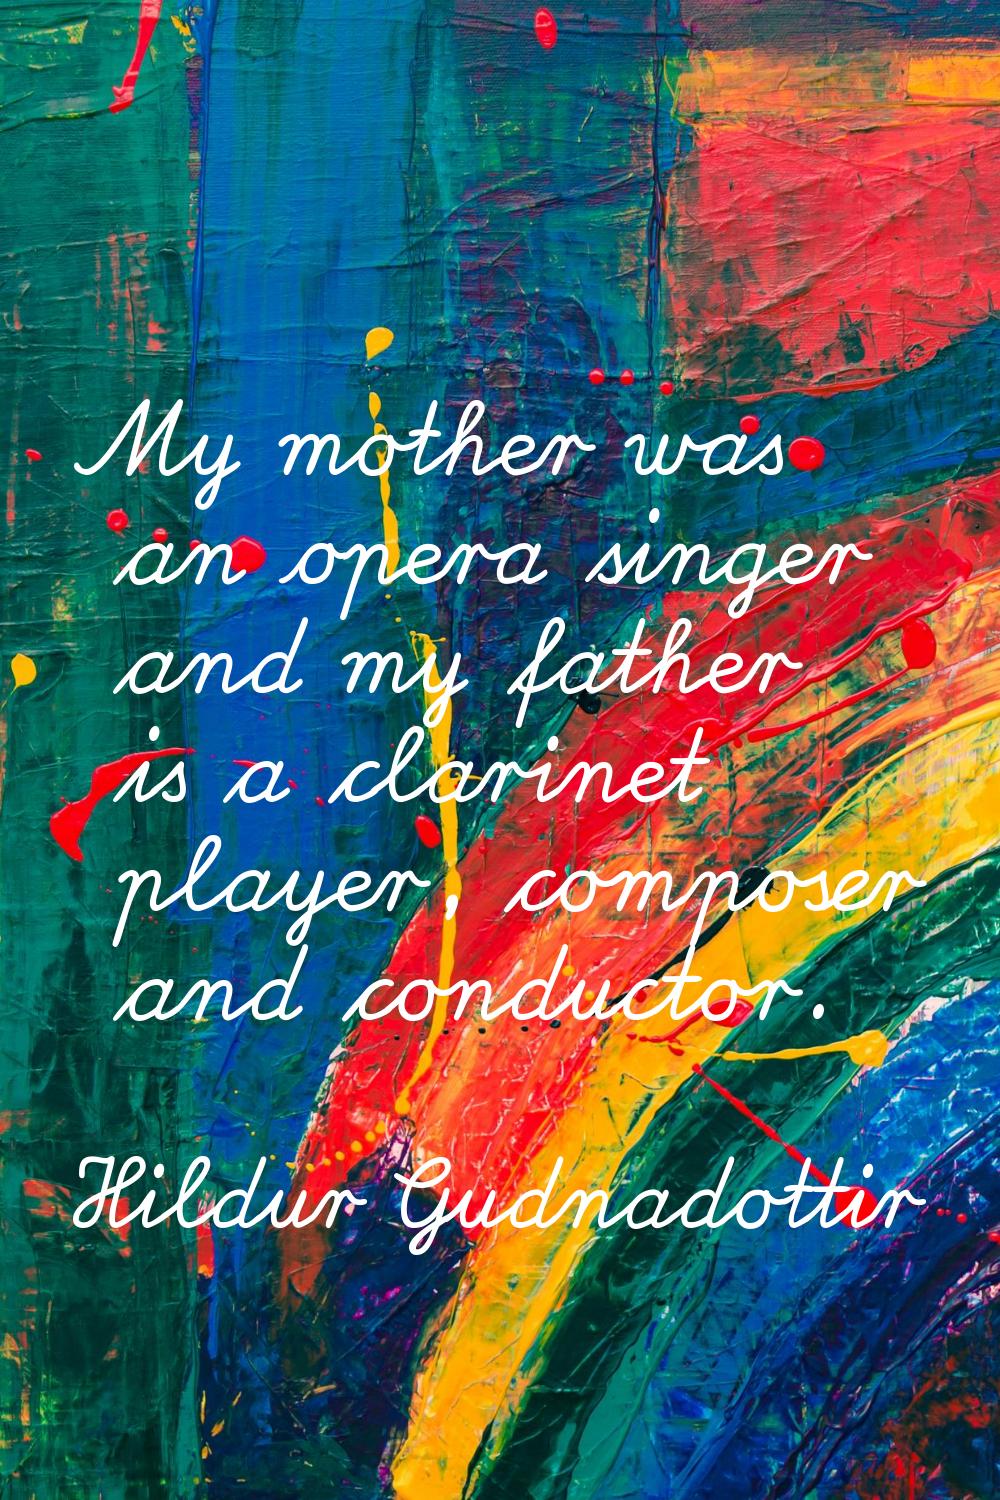 My mother was an opera singer and my father is a clarinet player, composer and conductor.